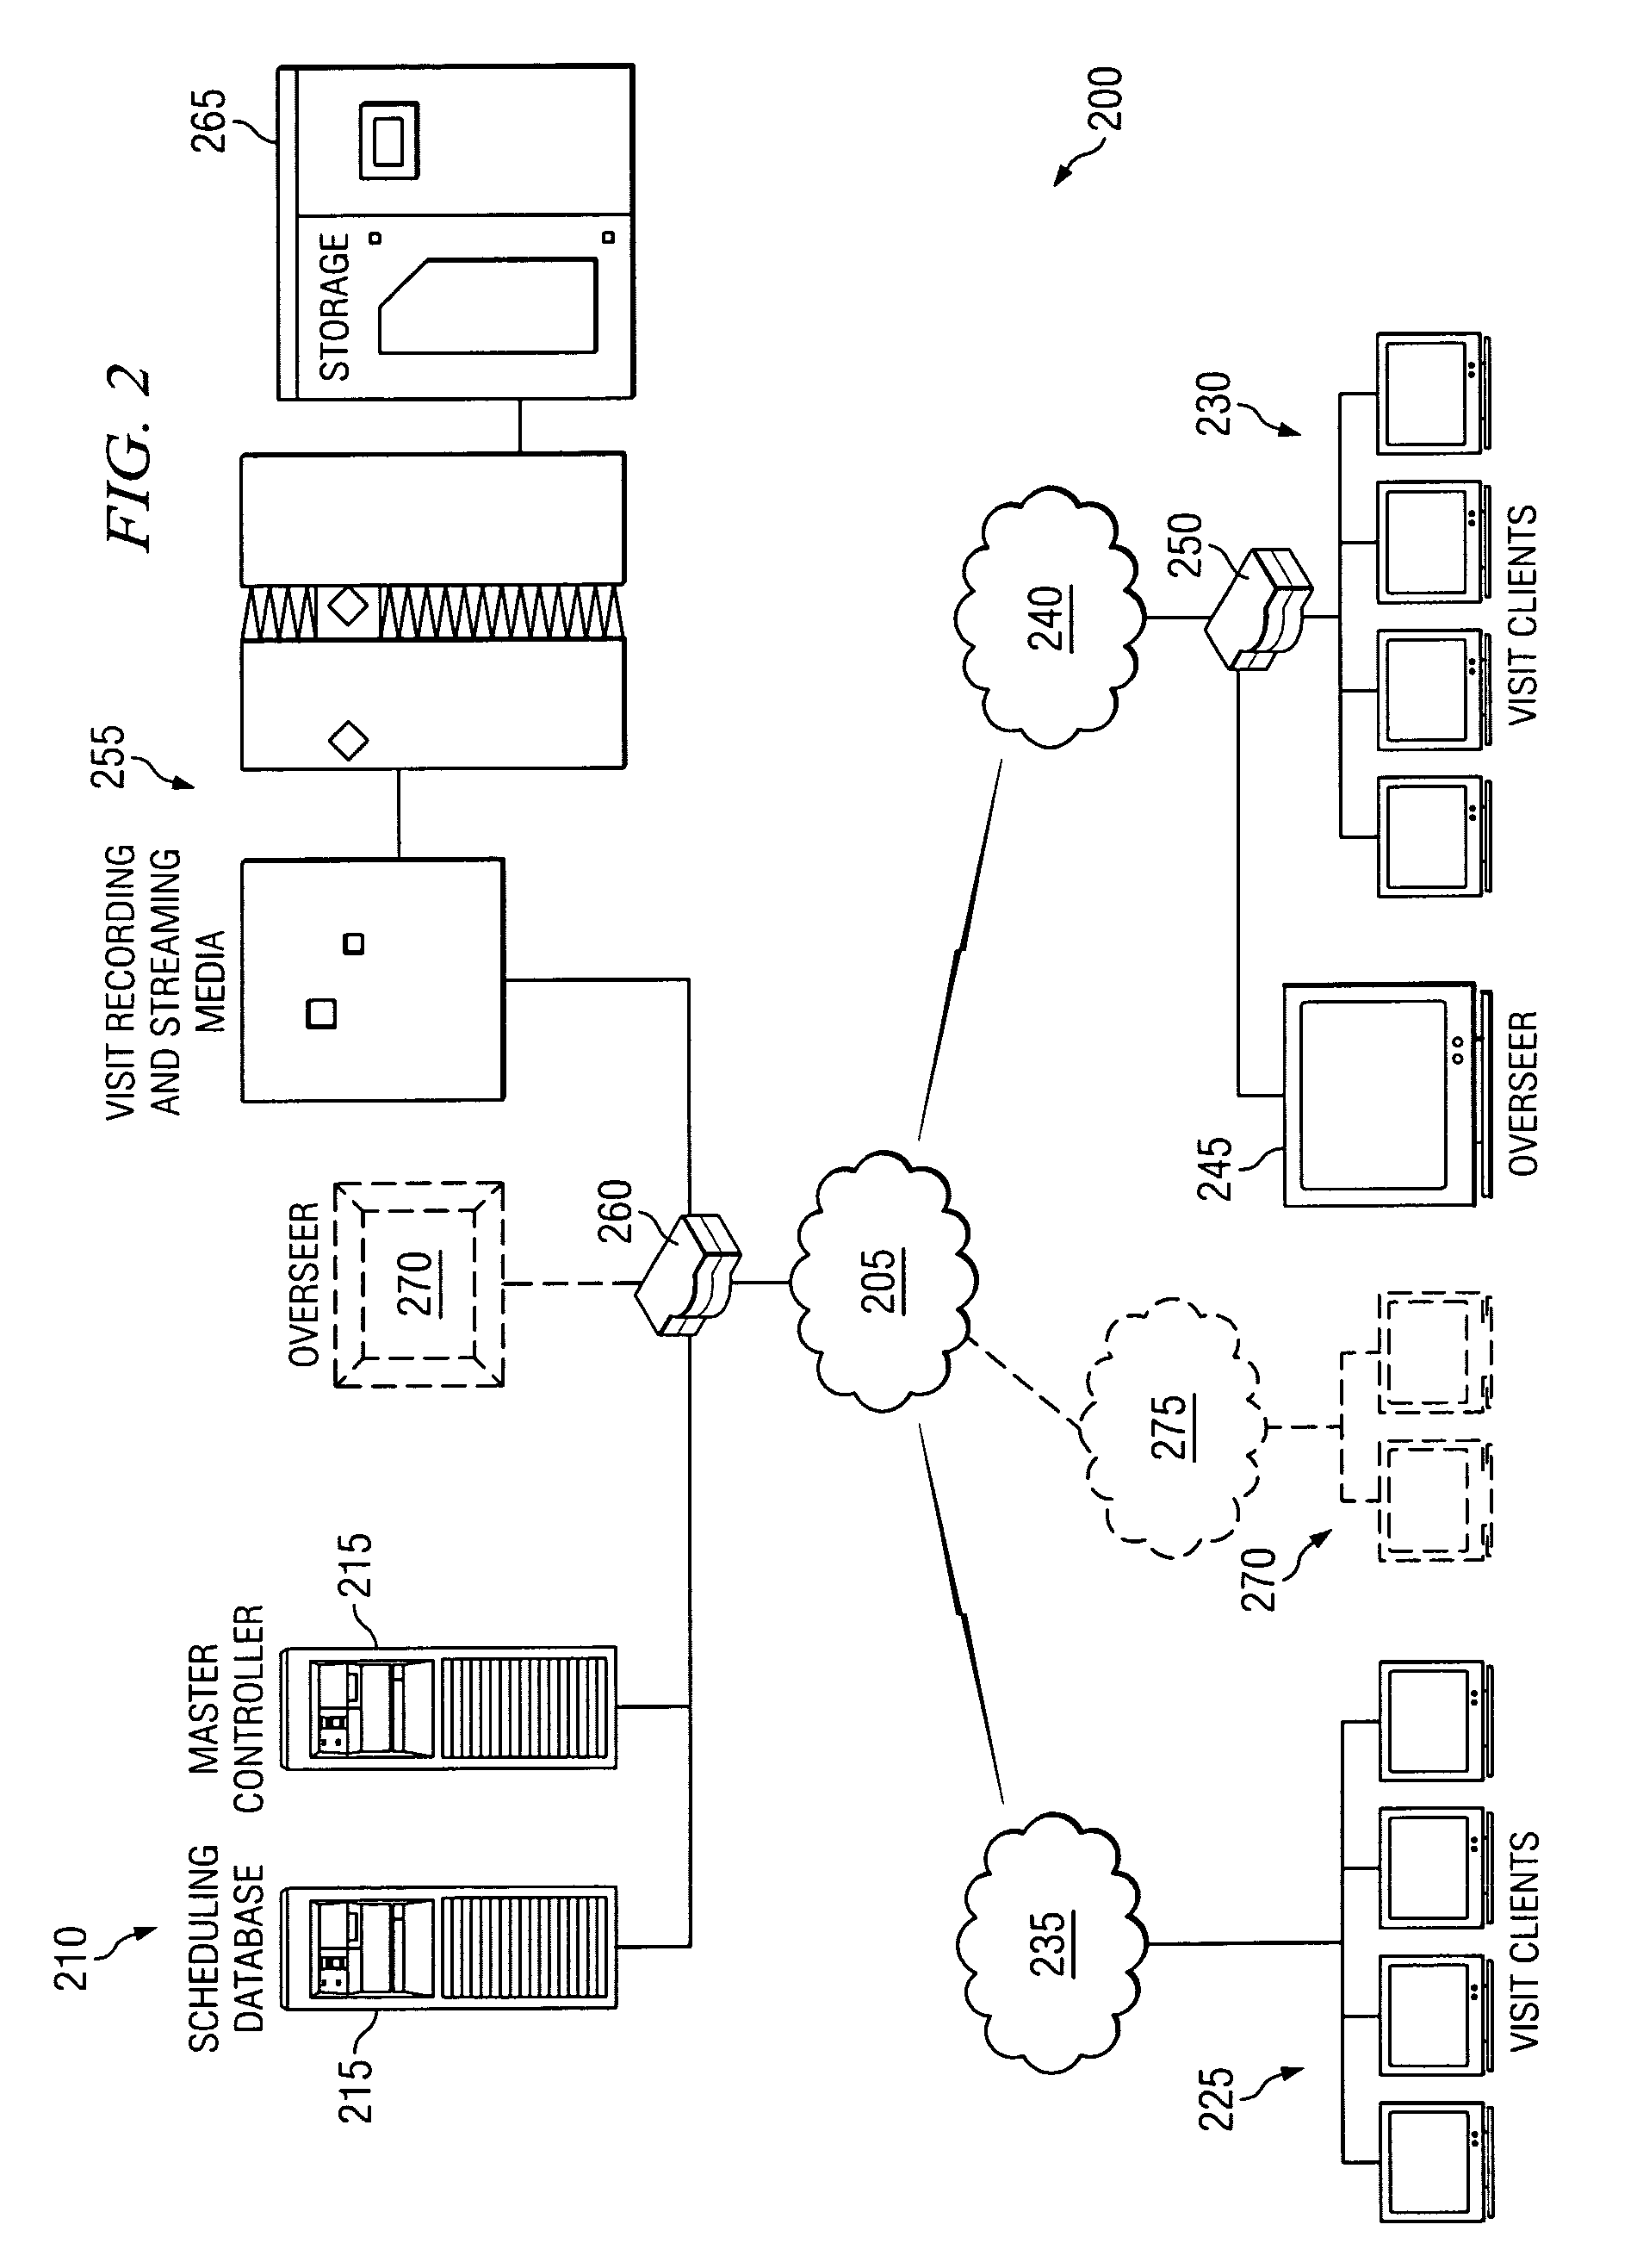 Systems and processes for scheduling and conducting audio/video communications